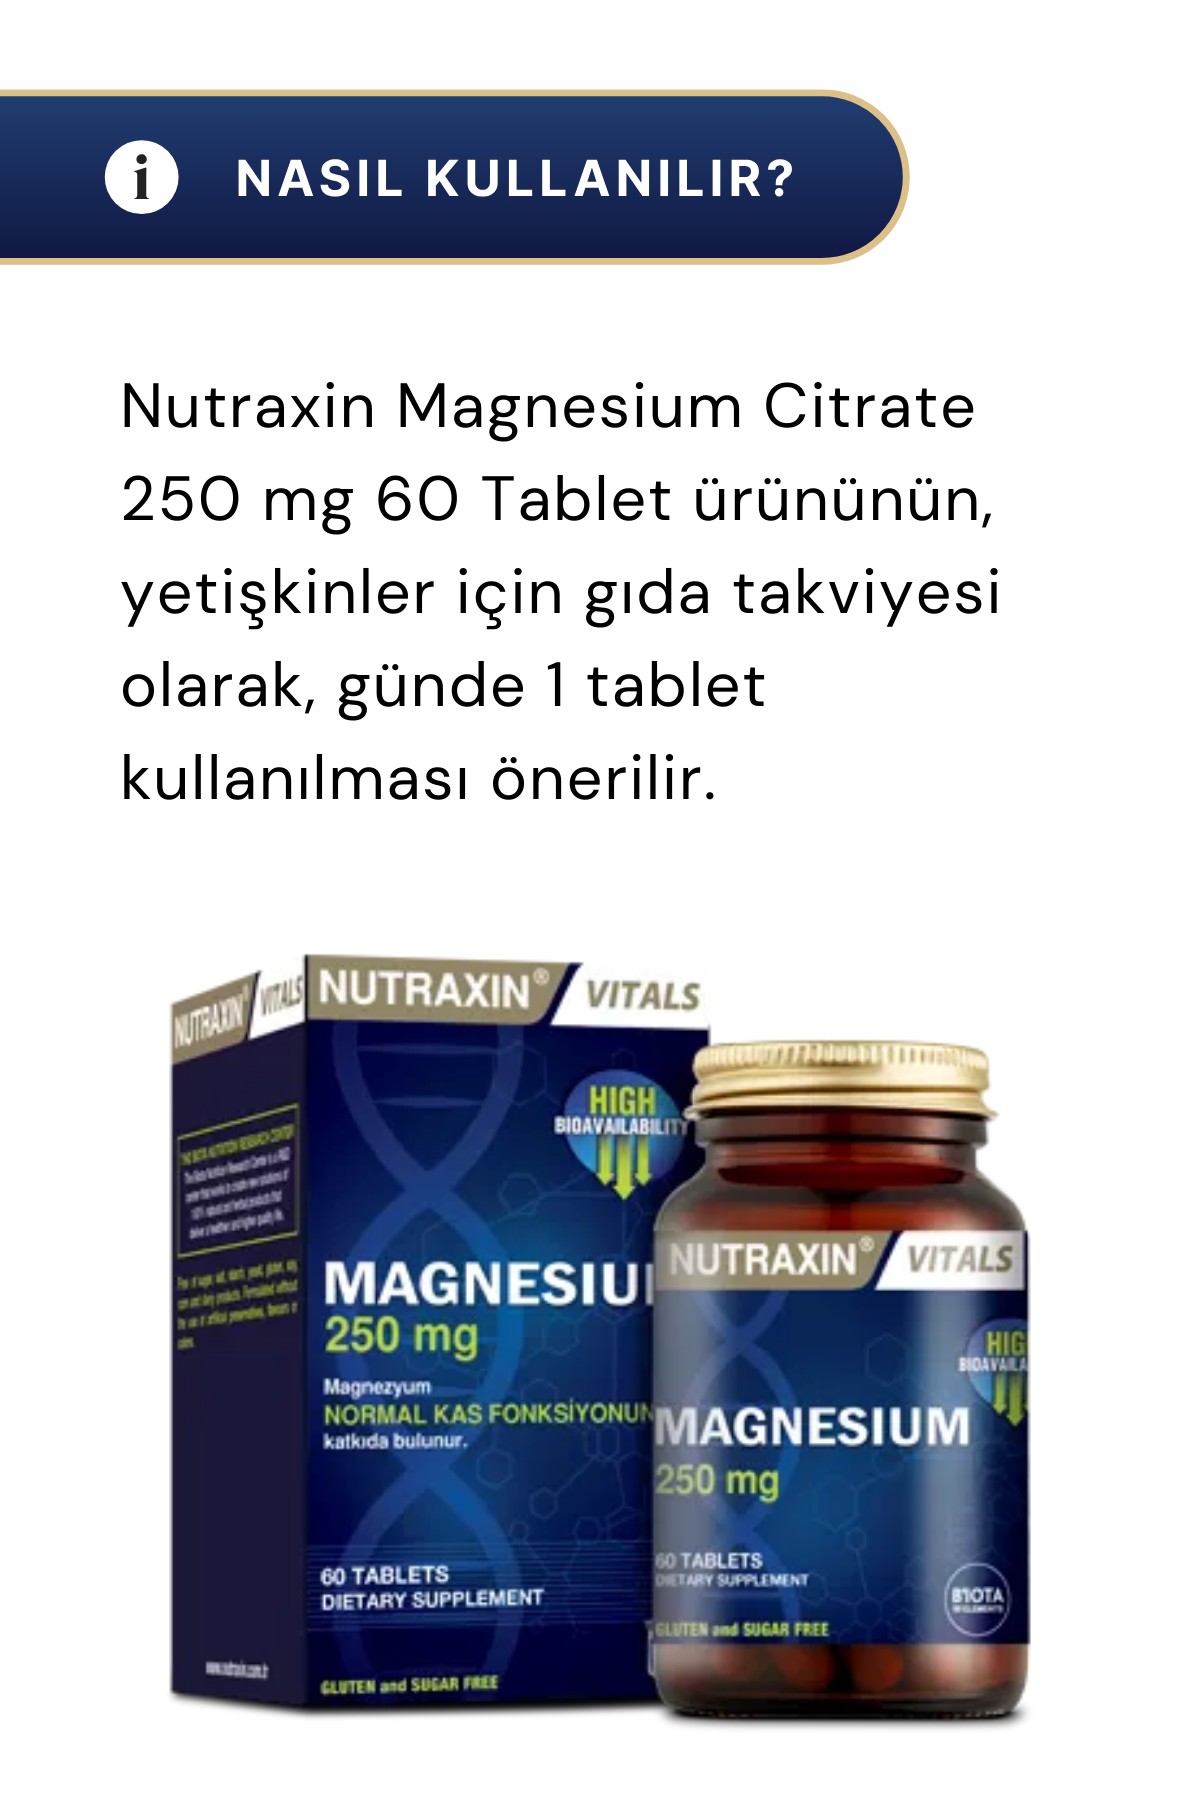 Nutraxin Magnesium Citrate 250 mg 60 Tablet 4'lü Paket